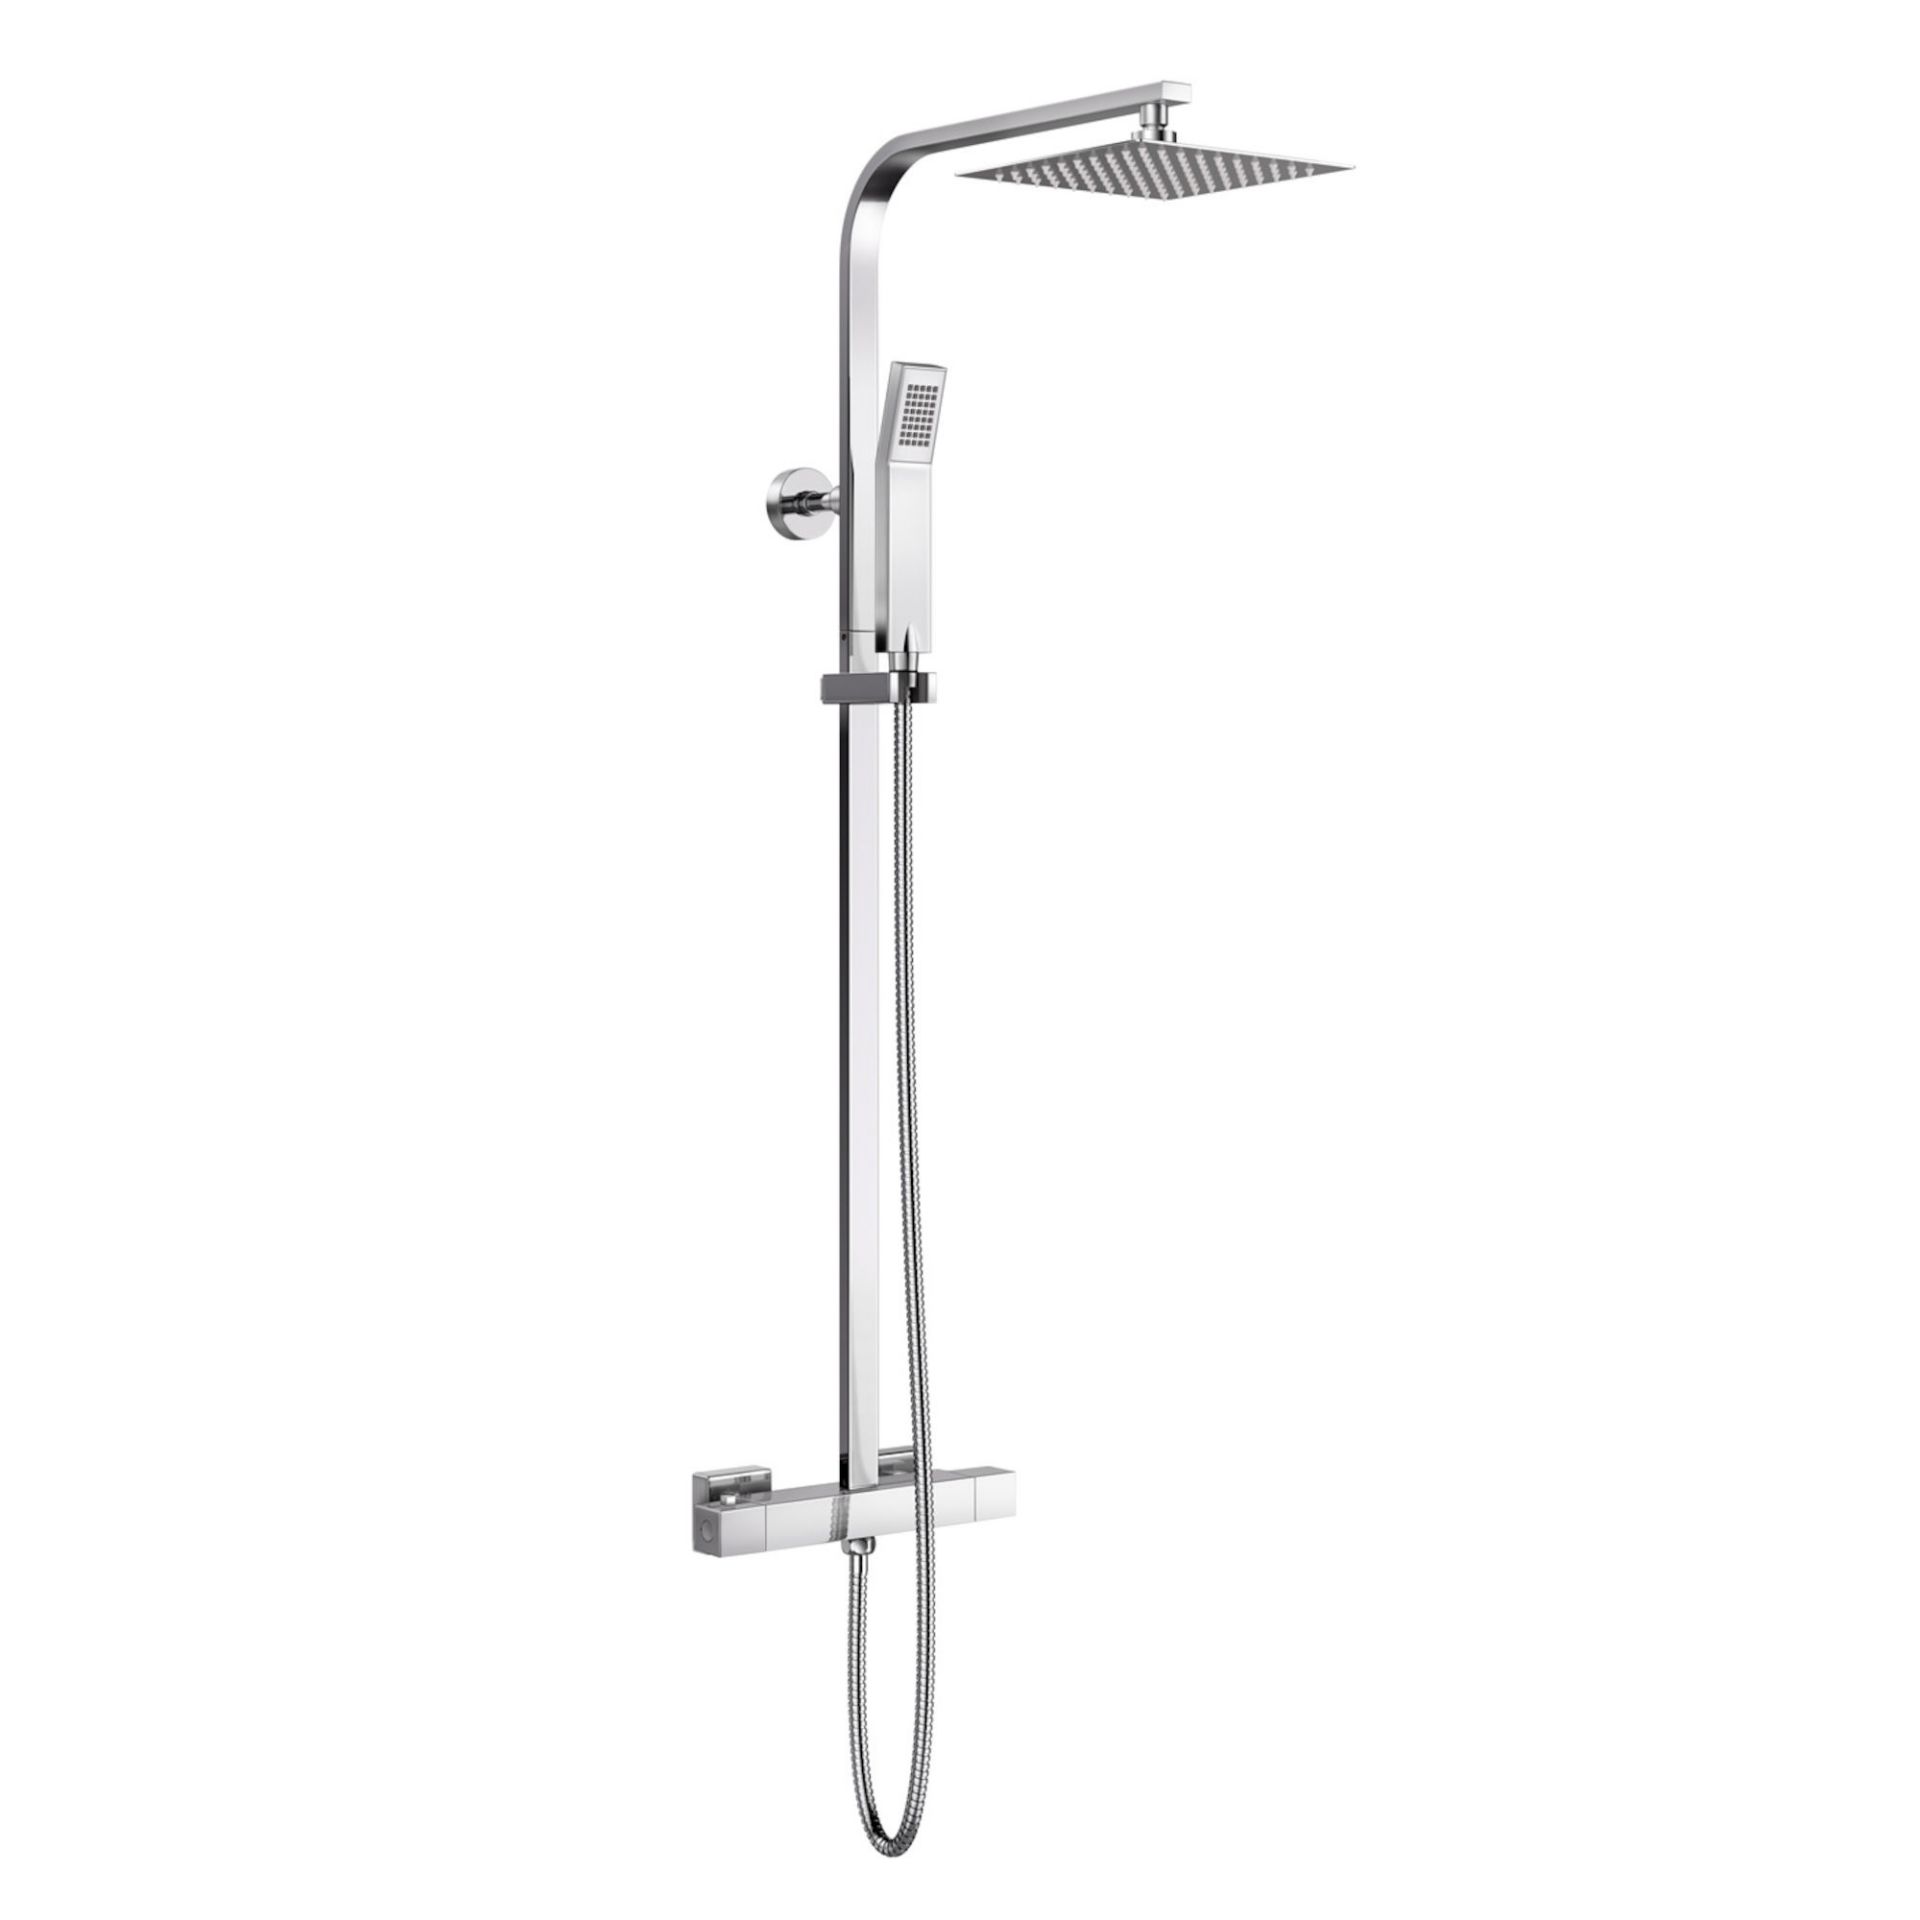 (XM51) Square Exposed Thermostatic Shower Kit - Denver. Style meets function with our gorgeous